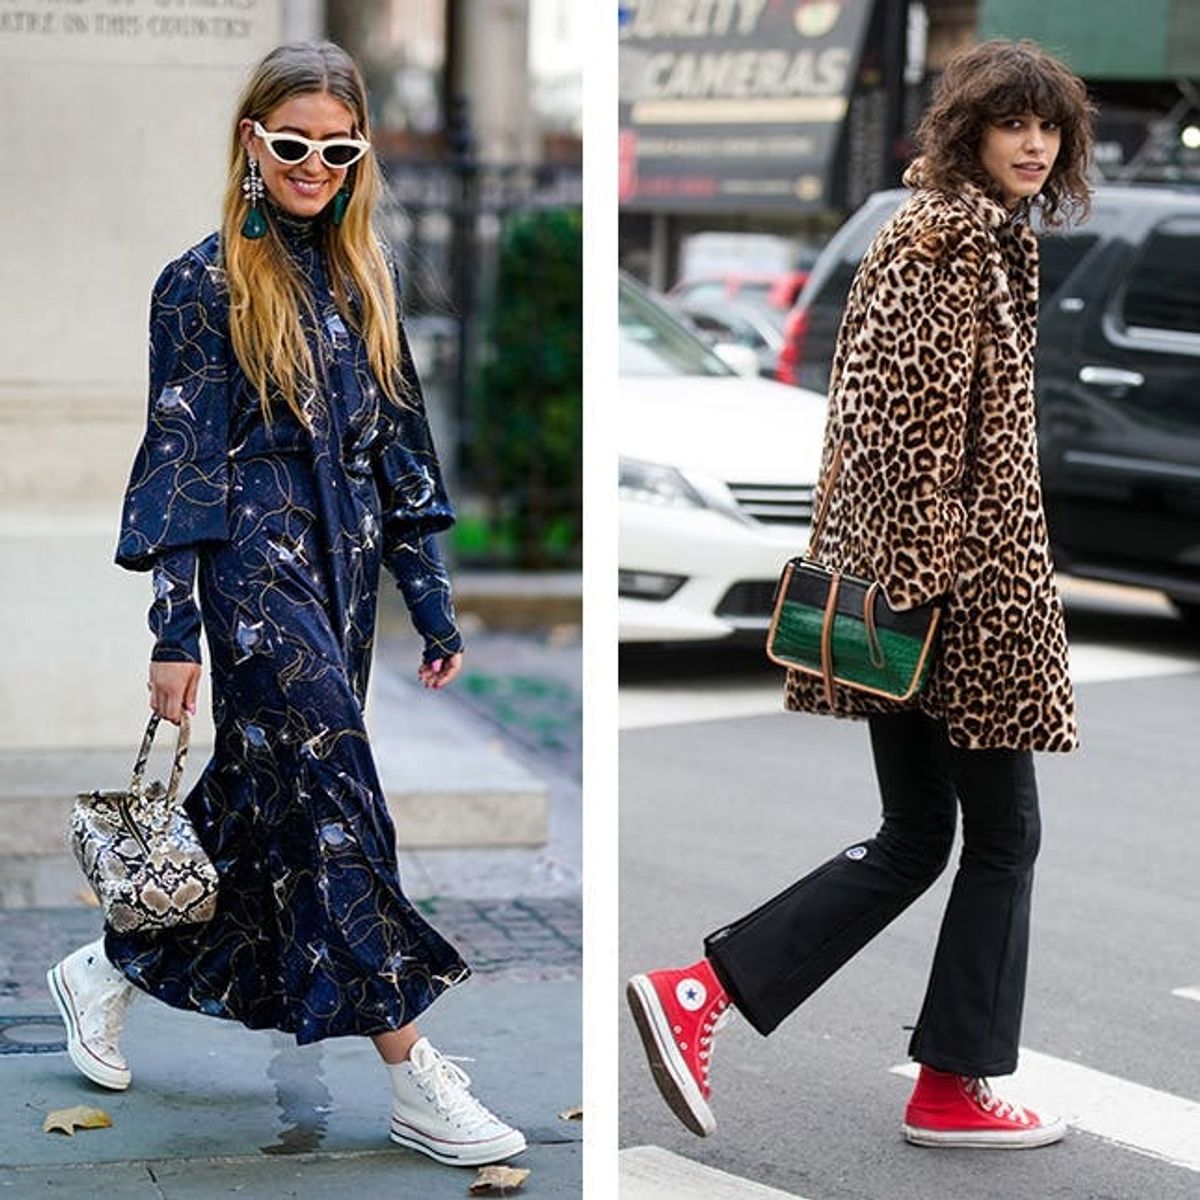 The Fashion-Girl Way to Style Your Favorite $55 Sneakers